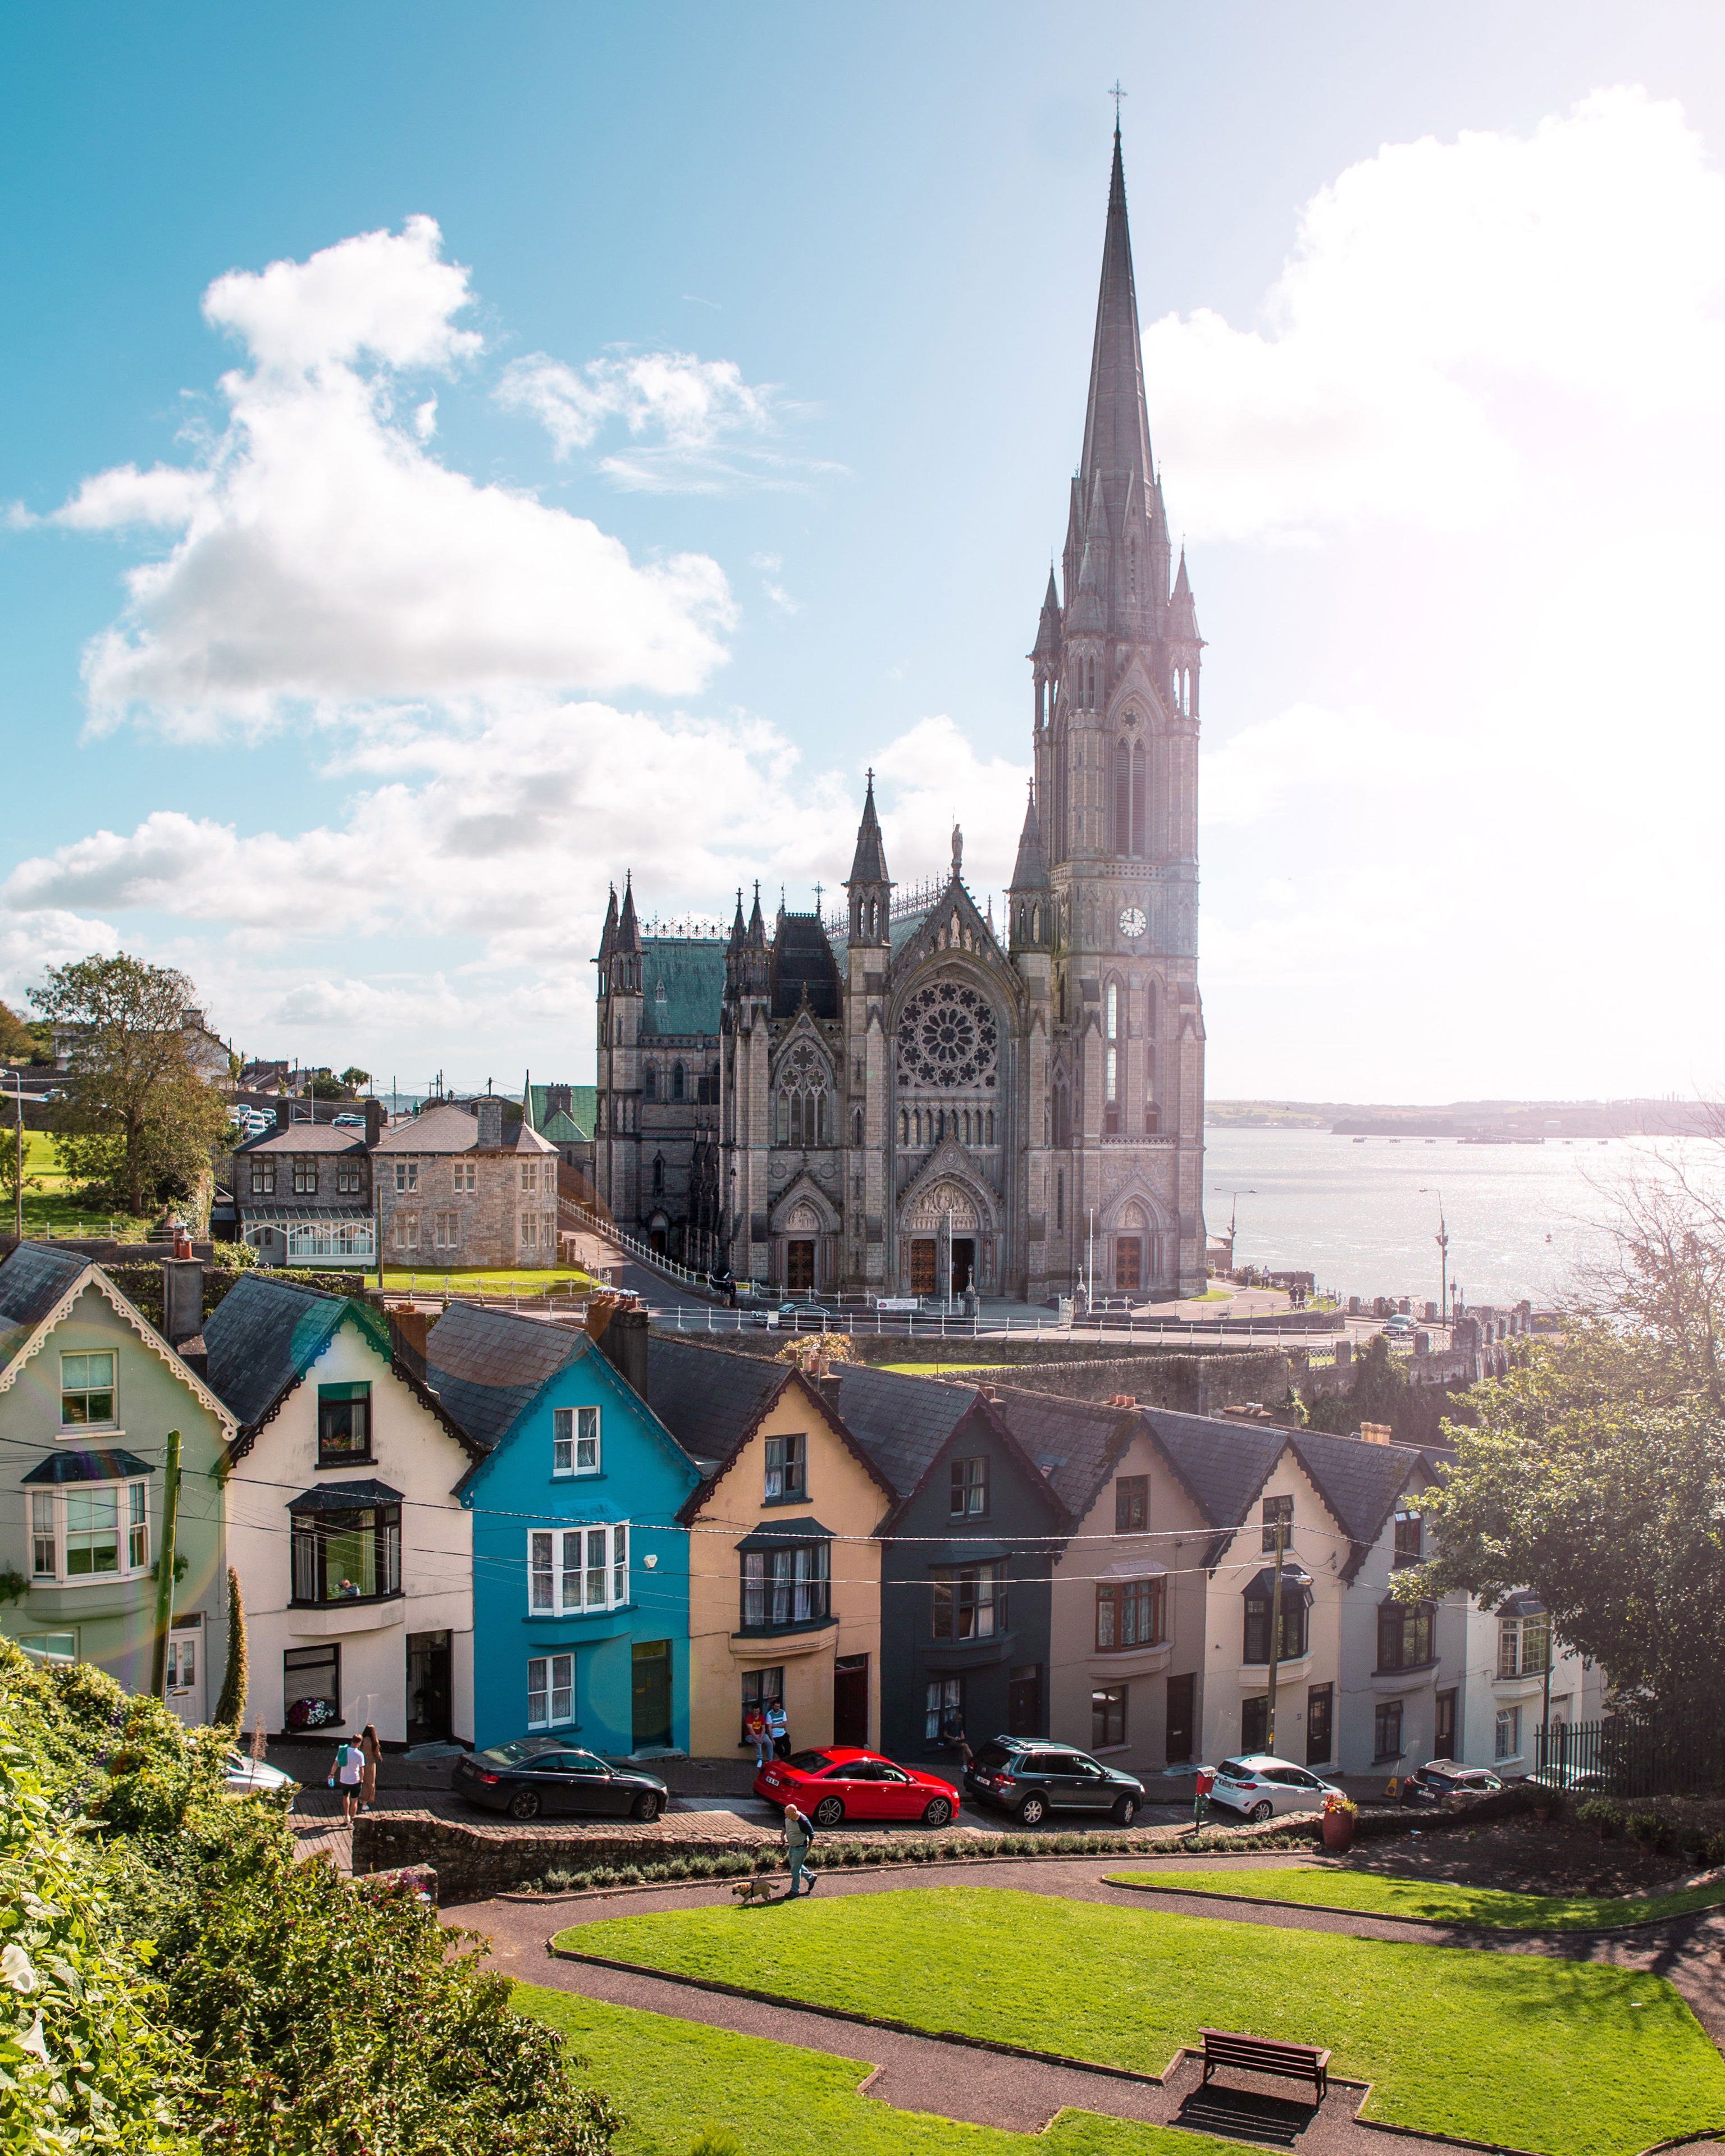 <p><strong>Location:</strong> County Cork</p> <p>Cobh redefines charming with its rows of candy-colored homes along the water and towering cathedral standing sentry over the harbor. <a href="https://www.cntraveler.com/gallery/25-most-beautiful-small-towns-in-europe?mbid=synd_msn_rss&utm_source=msn&utm_medium=syndication">This small town</a> is particularly popular with cruise-lovers—about 60 ships stop there every year. In fact, Cobh was the final port of call for the RMS <em>Titanic,</em> and a commemorative museum stands in the city today.</p><p>Sign up to receive the latest news, expert tips, and inspiration on all things travel</p><a href="https://www.cntraveler.com/newsletter/the-daily?sourceCode=msnsend">Inspire Me</a>